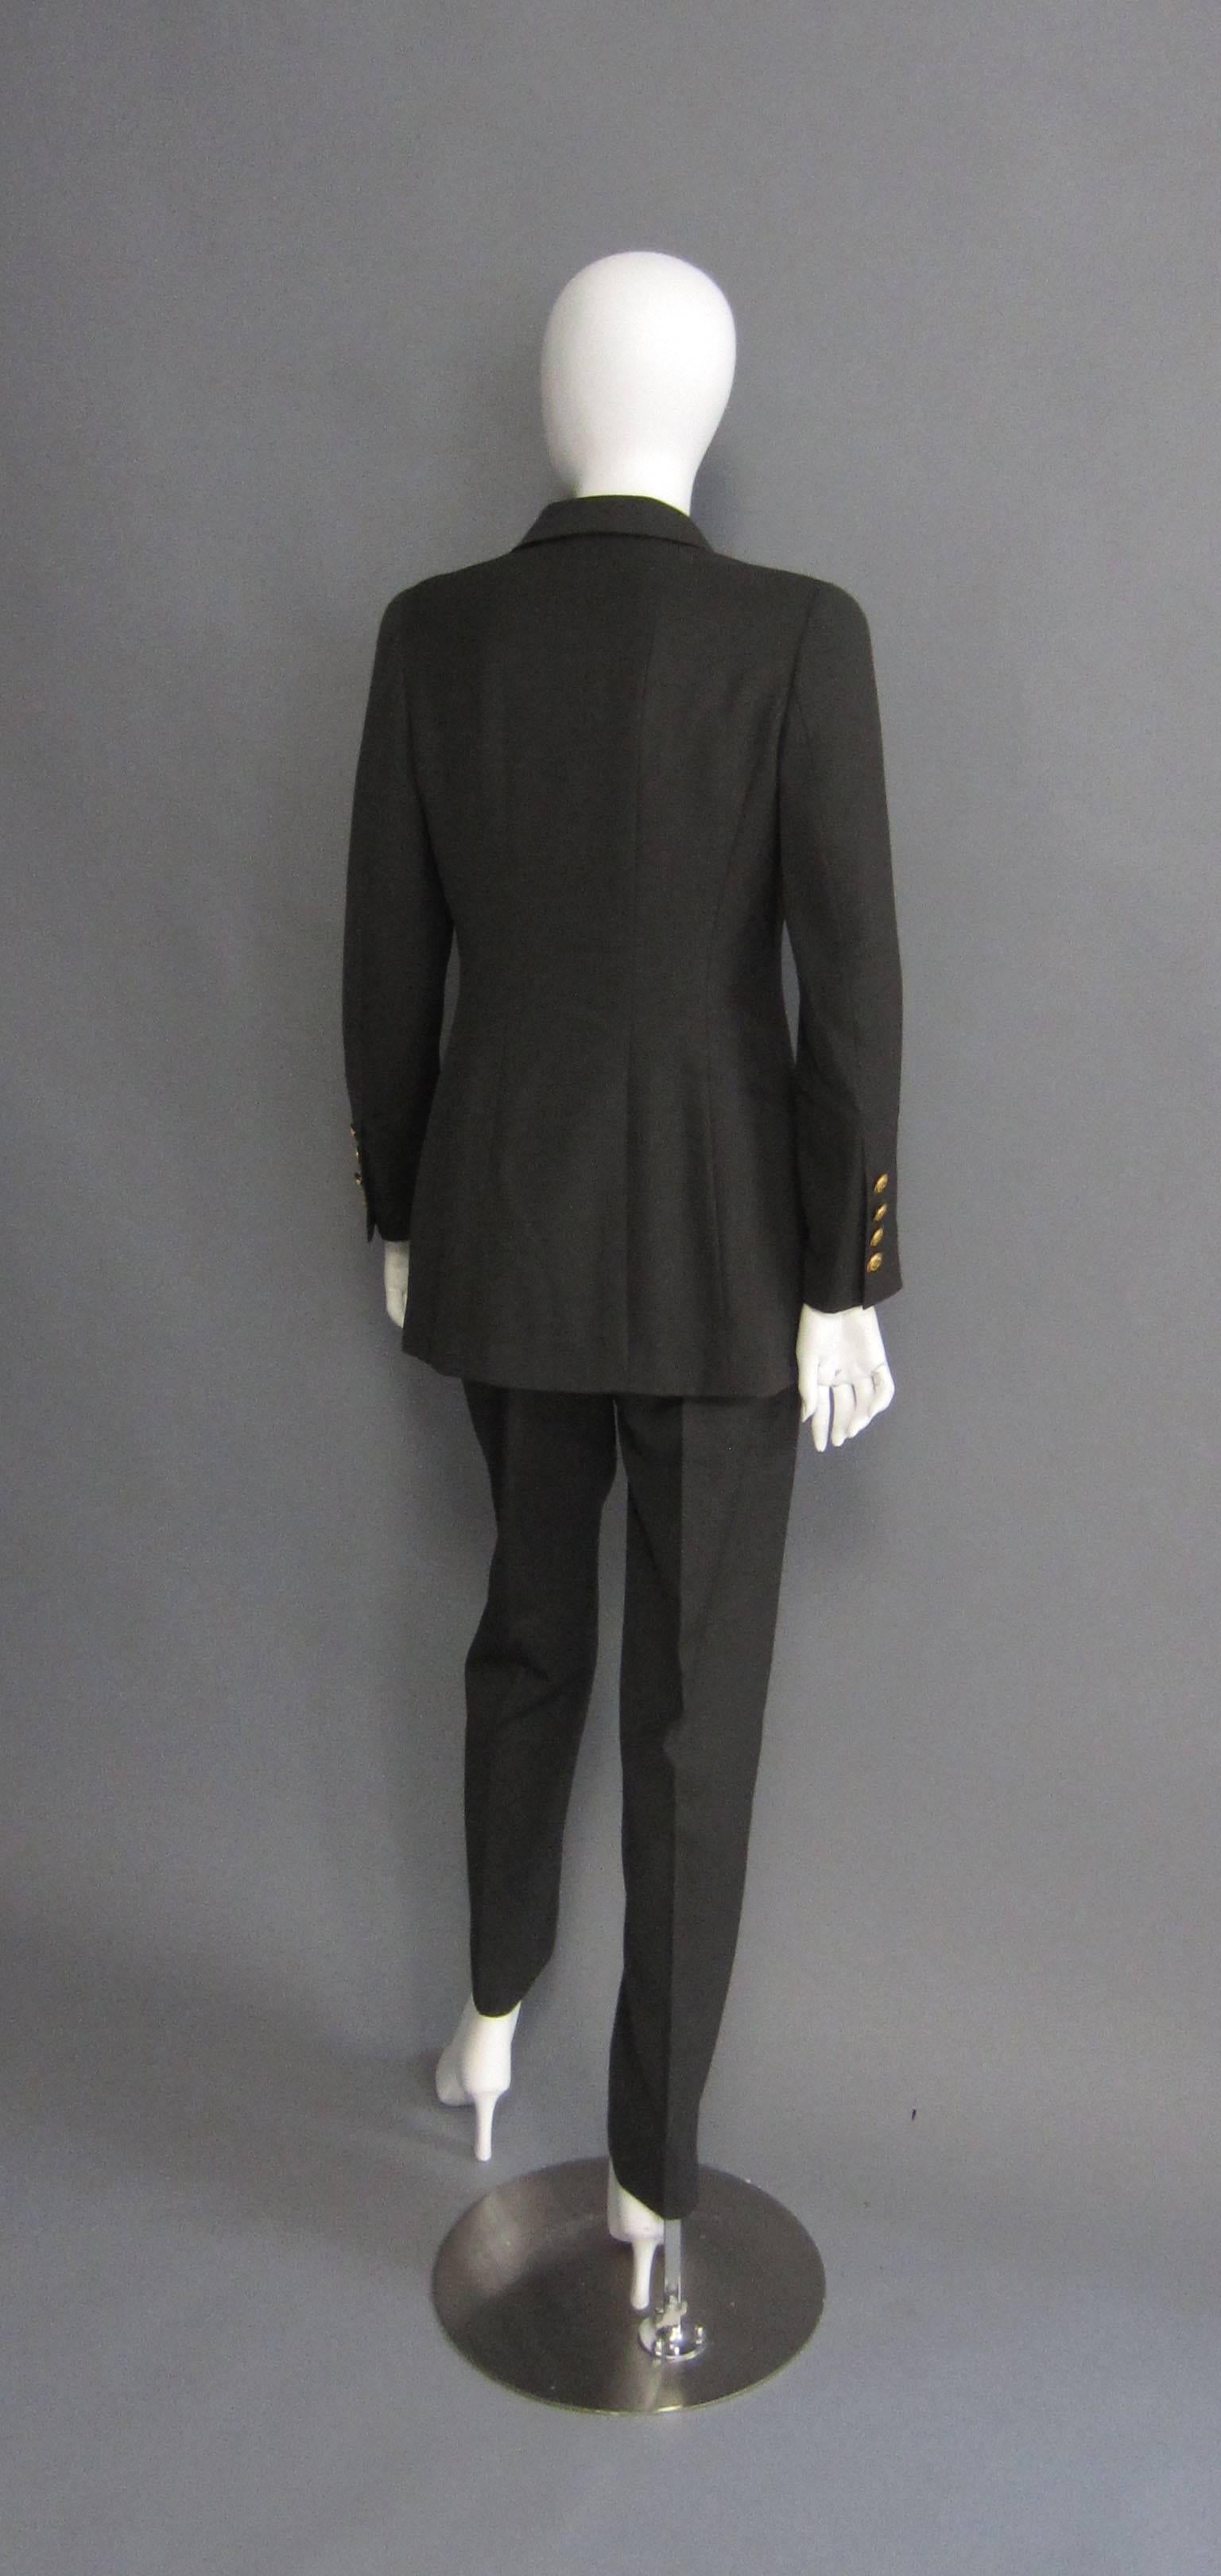 1996 CHANEL Dark Green Pant Suit with Gold Button Detail For Sale 1